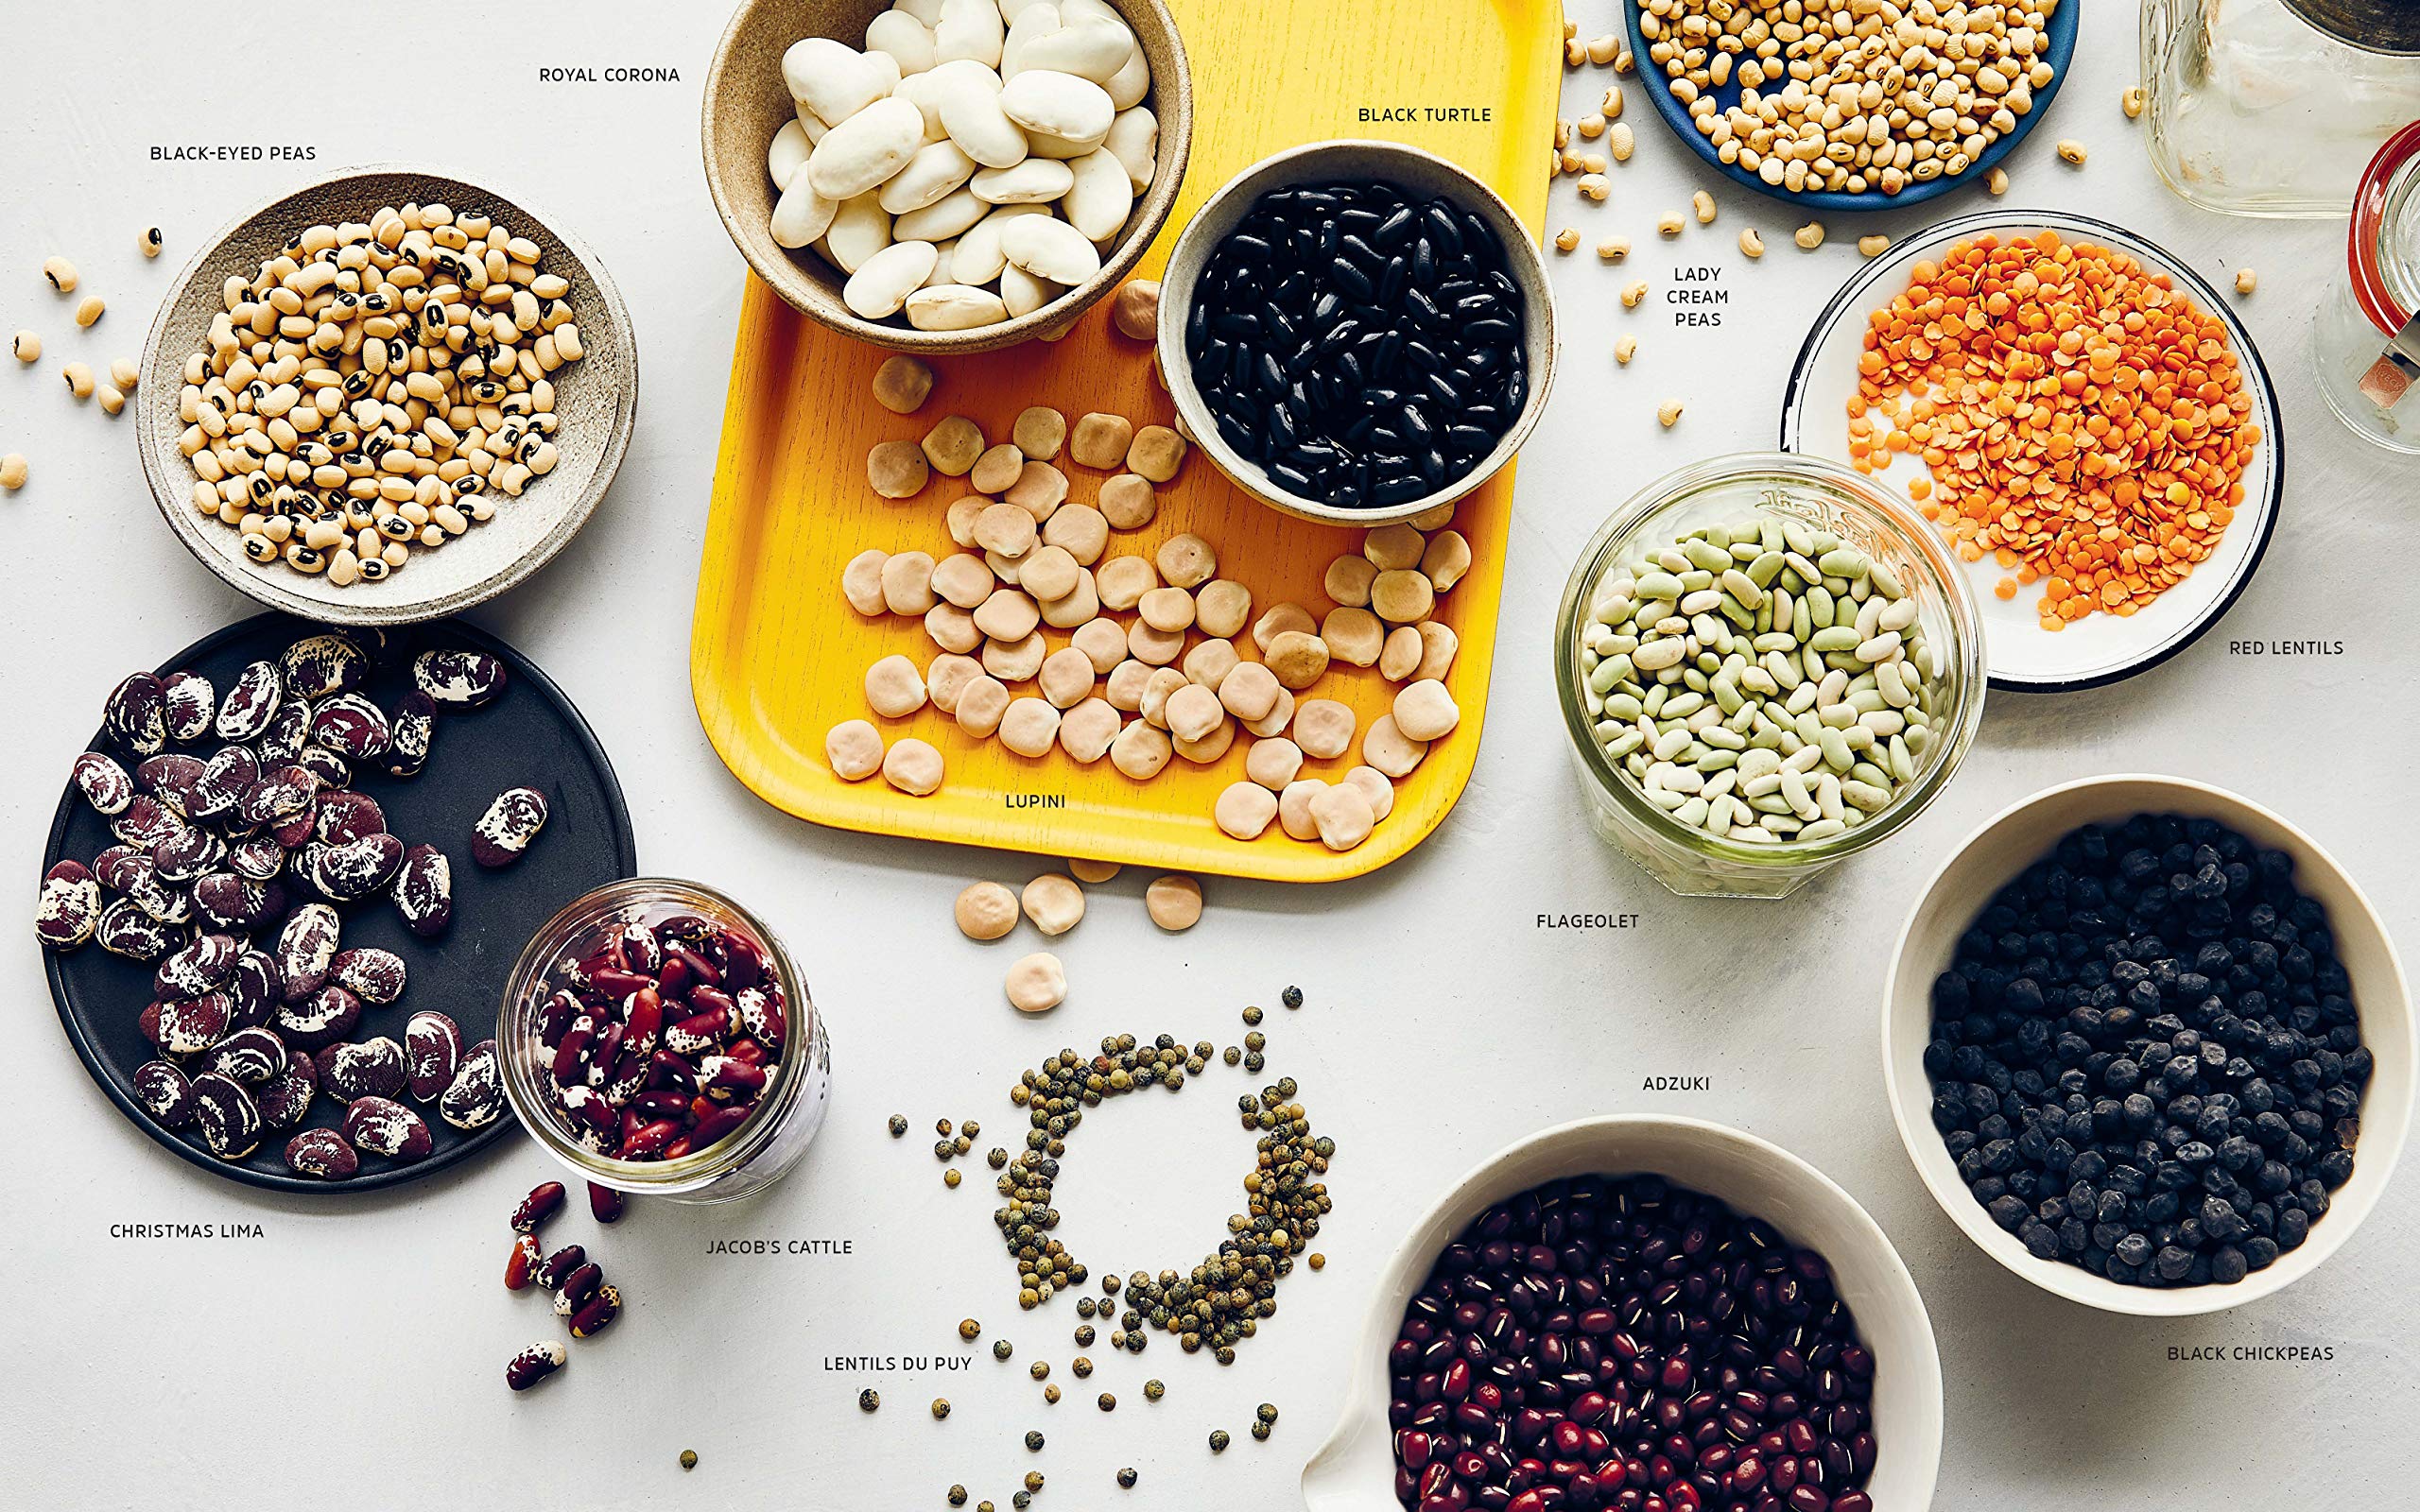 Cool Beans: The Ultimate Guide to Cooking with the World's Most Versatile Plant-Based Protein, with 125 Recipes (Joe Yonan)